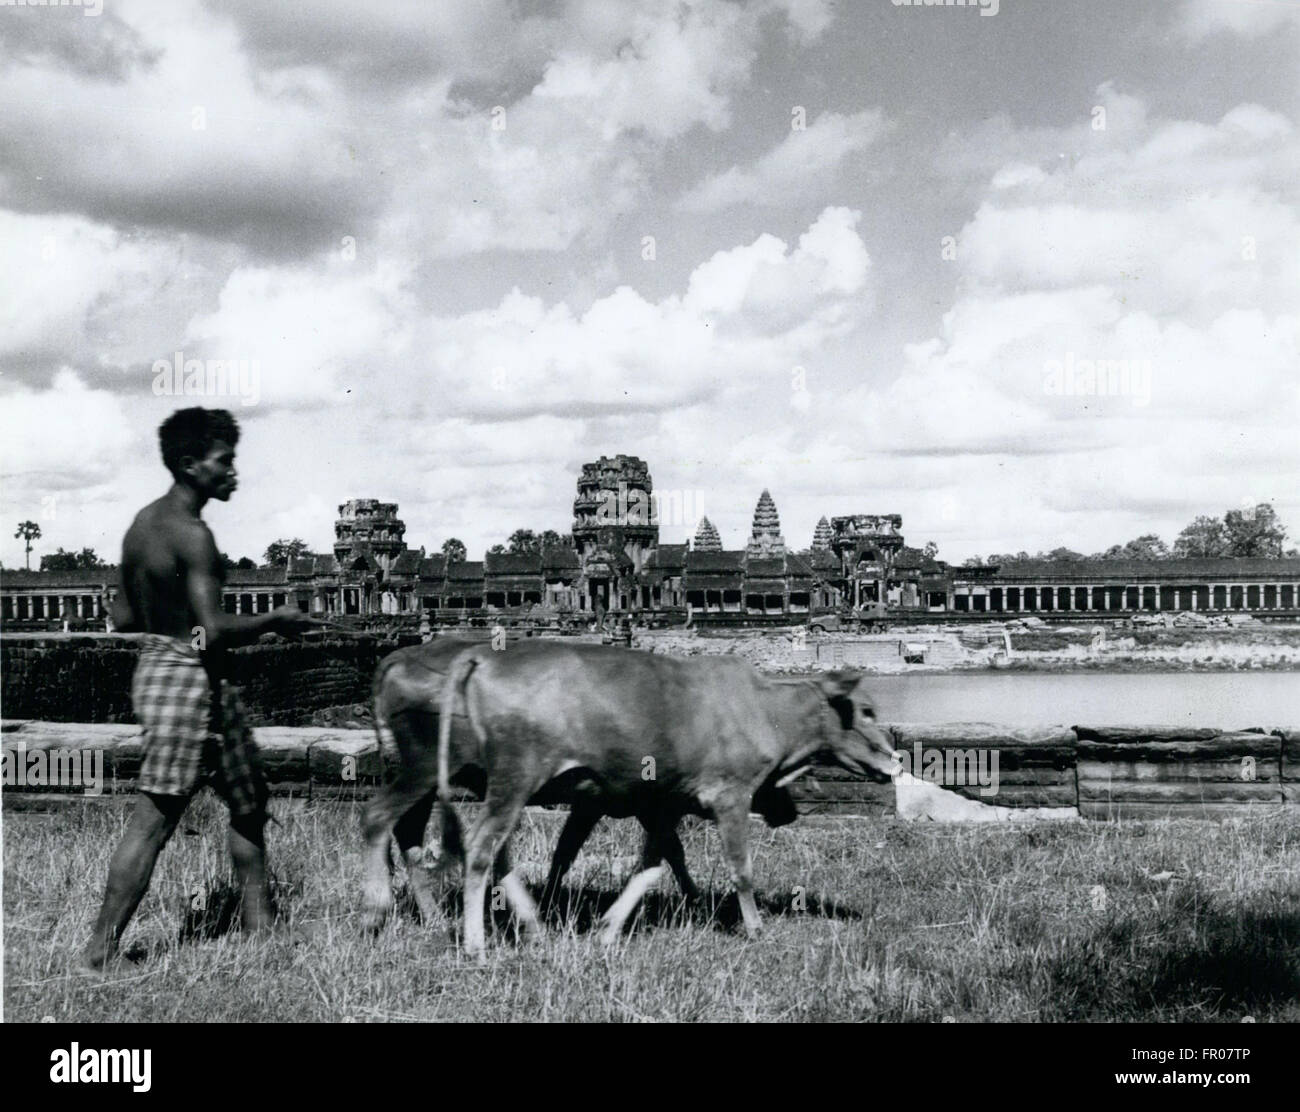 1962 - Life as Usual: A farmer near Siem Reap, Cambodia, is not impressed with Angkor Wat, the fantastic temple built in the XIIth Century. Although it is one of the wonders of the world, he is more used to it than are visitors, and he ignores it. © Keystone Pictures USA/ZUMAPRESS.com/Alamy Live News Stock Photo